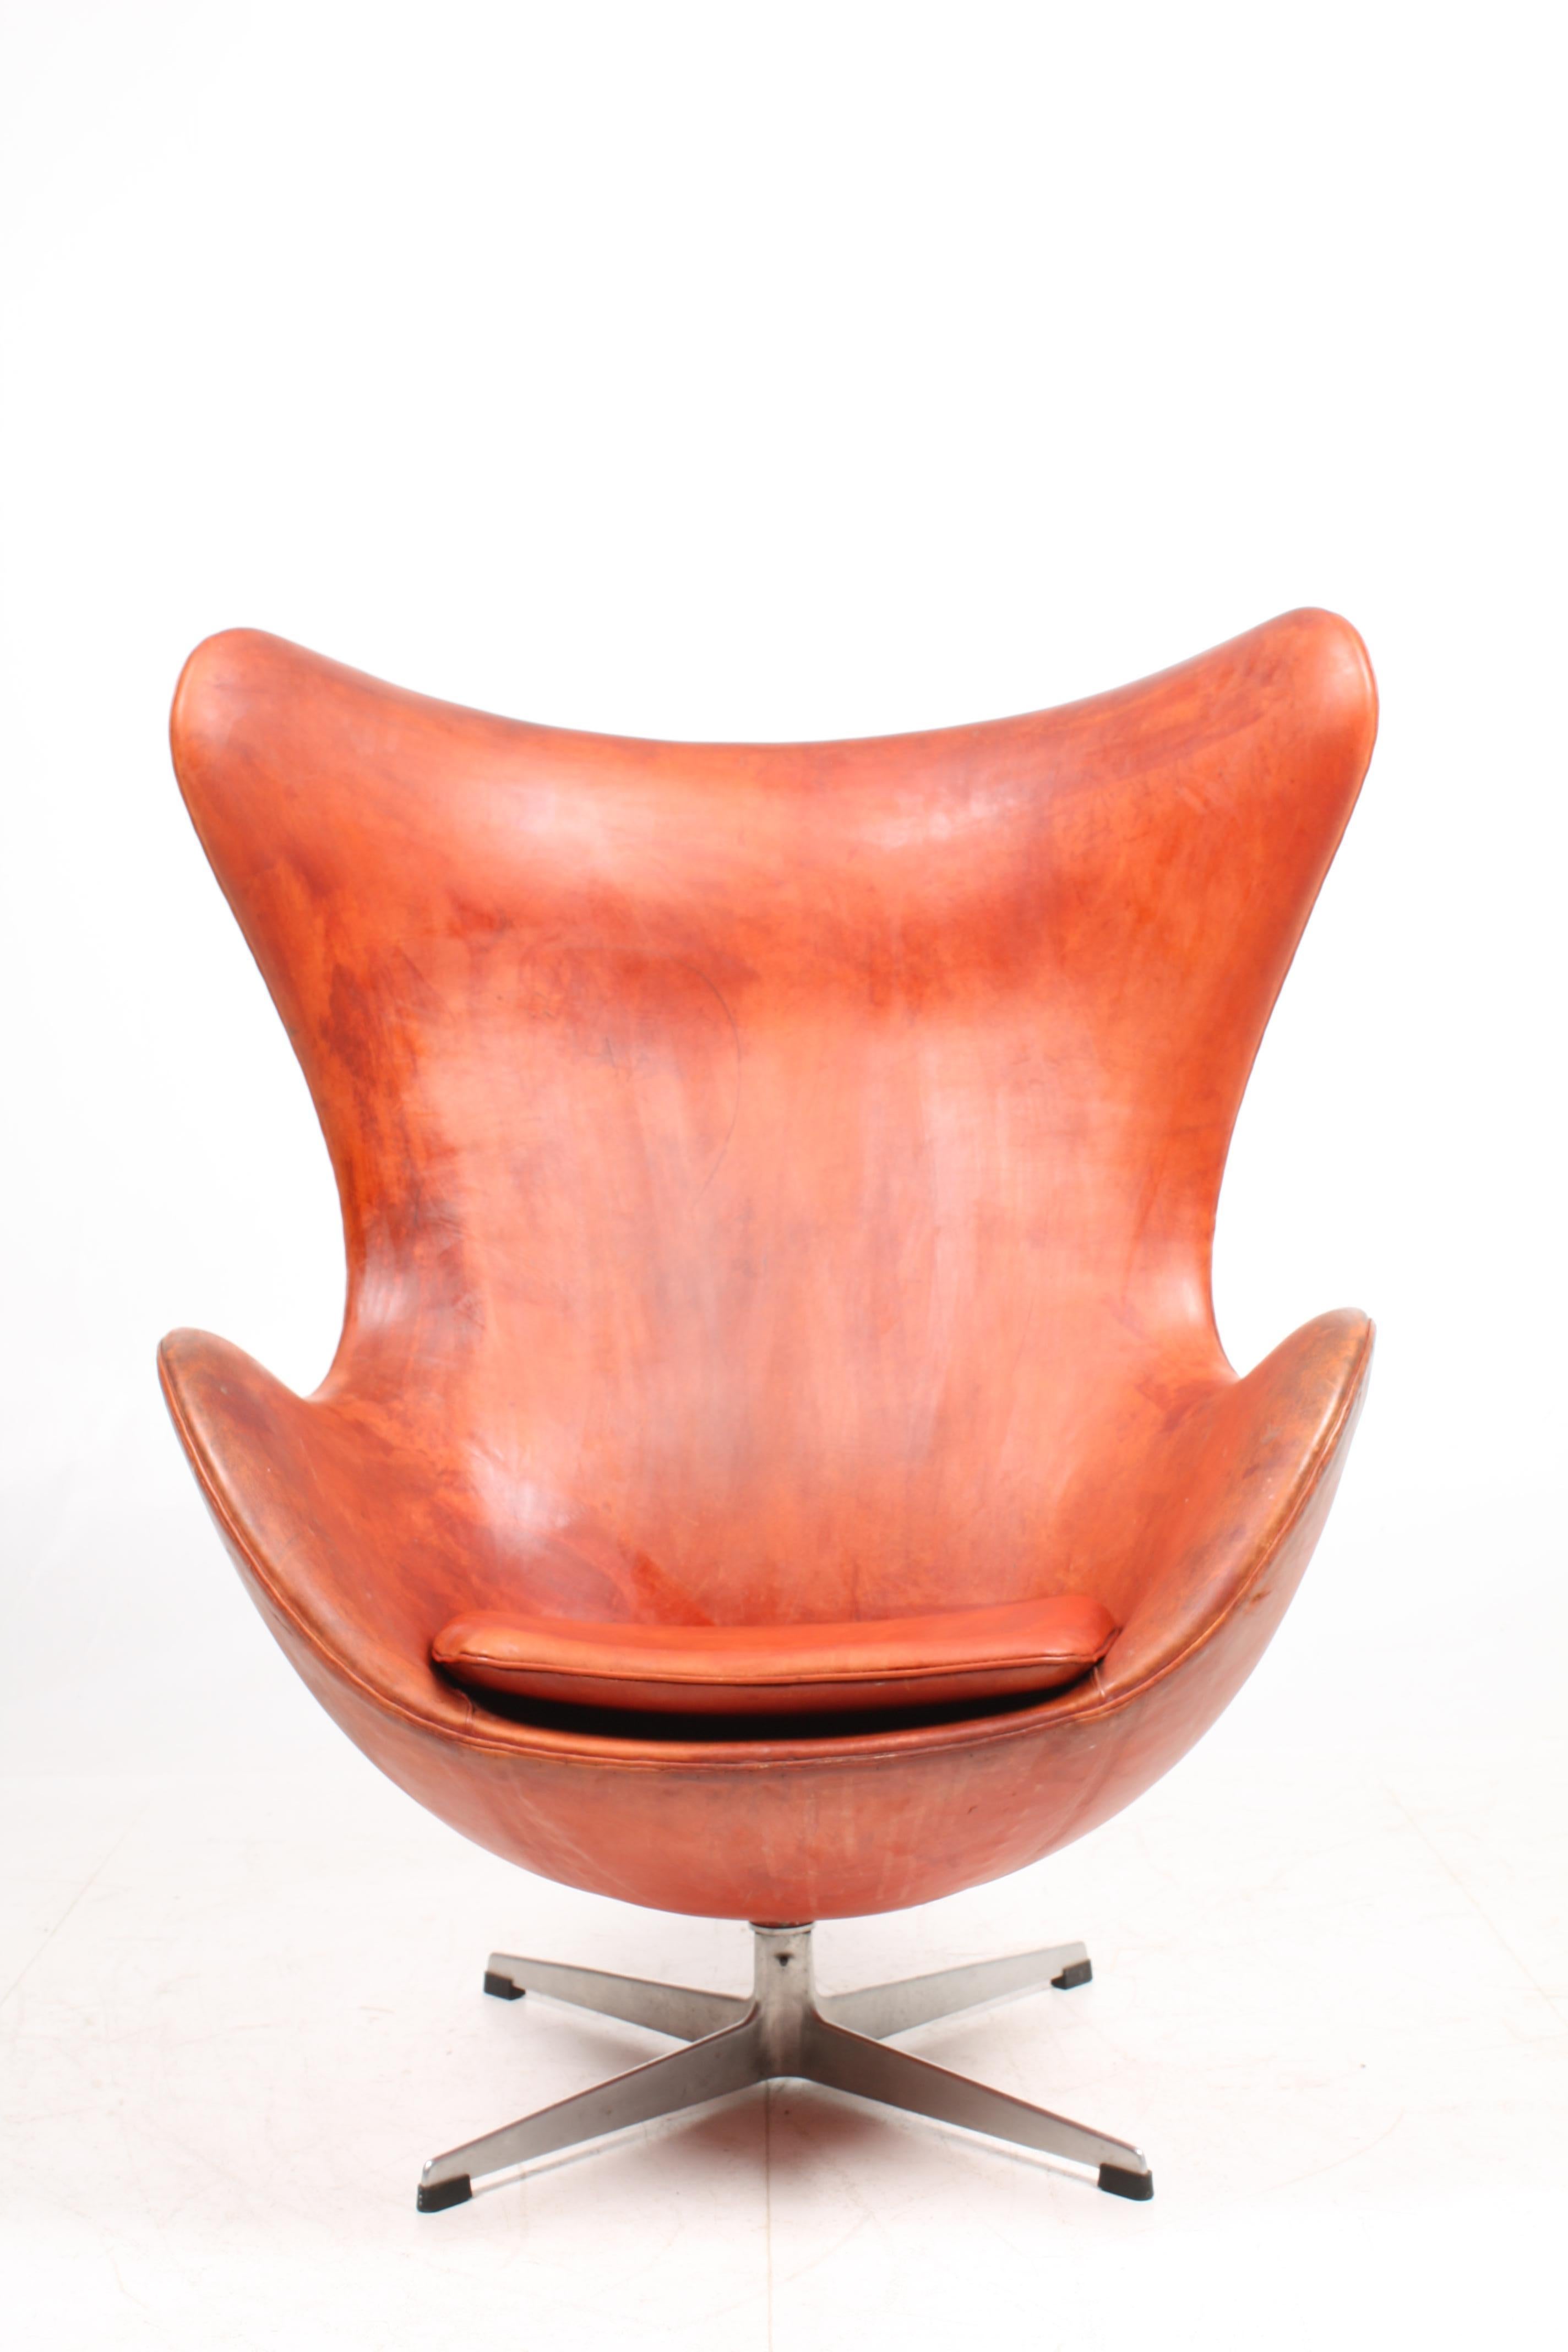 Egg chair in patinated leather designed by Maa. Arne Jacobsen in 1958. Made in Denmark, 1965. Original condition.